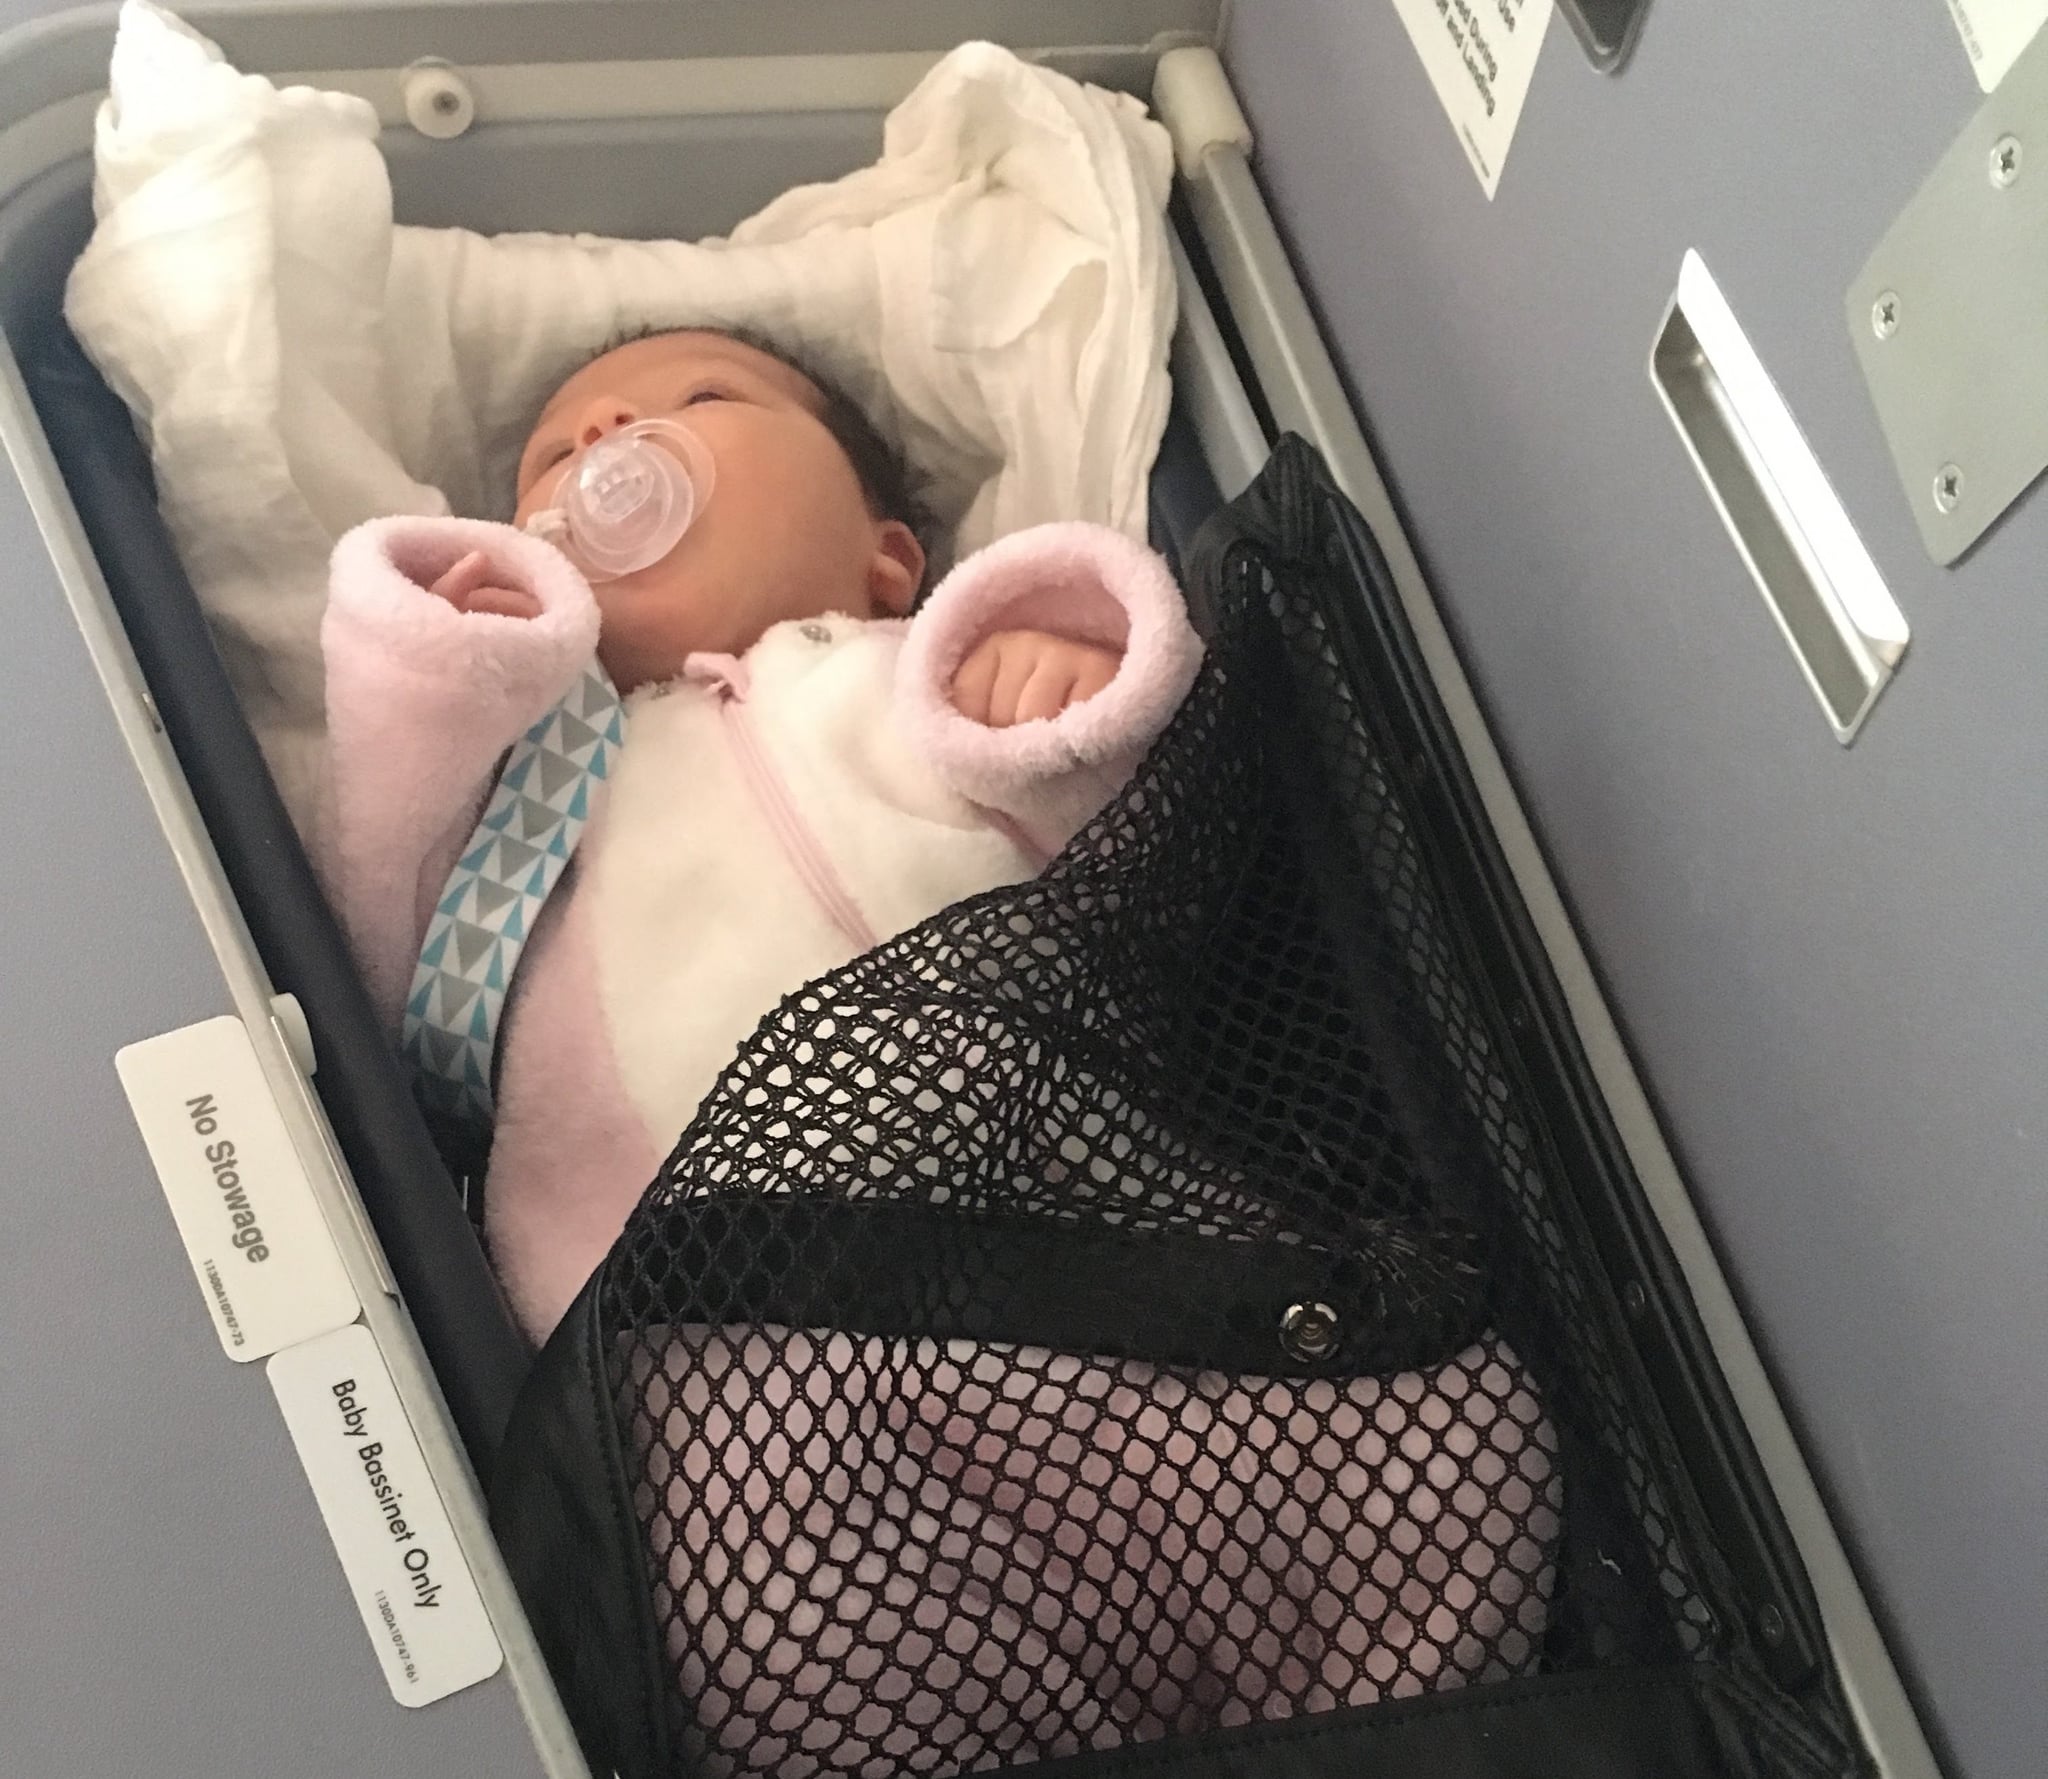 flying with car seats and strollers jetblue